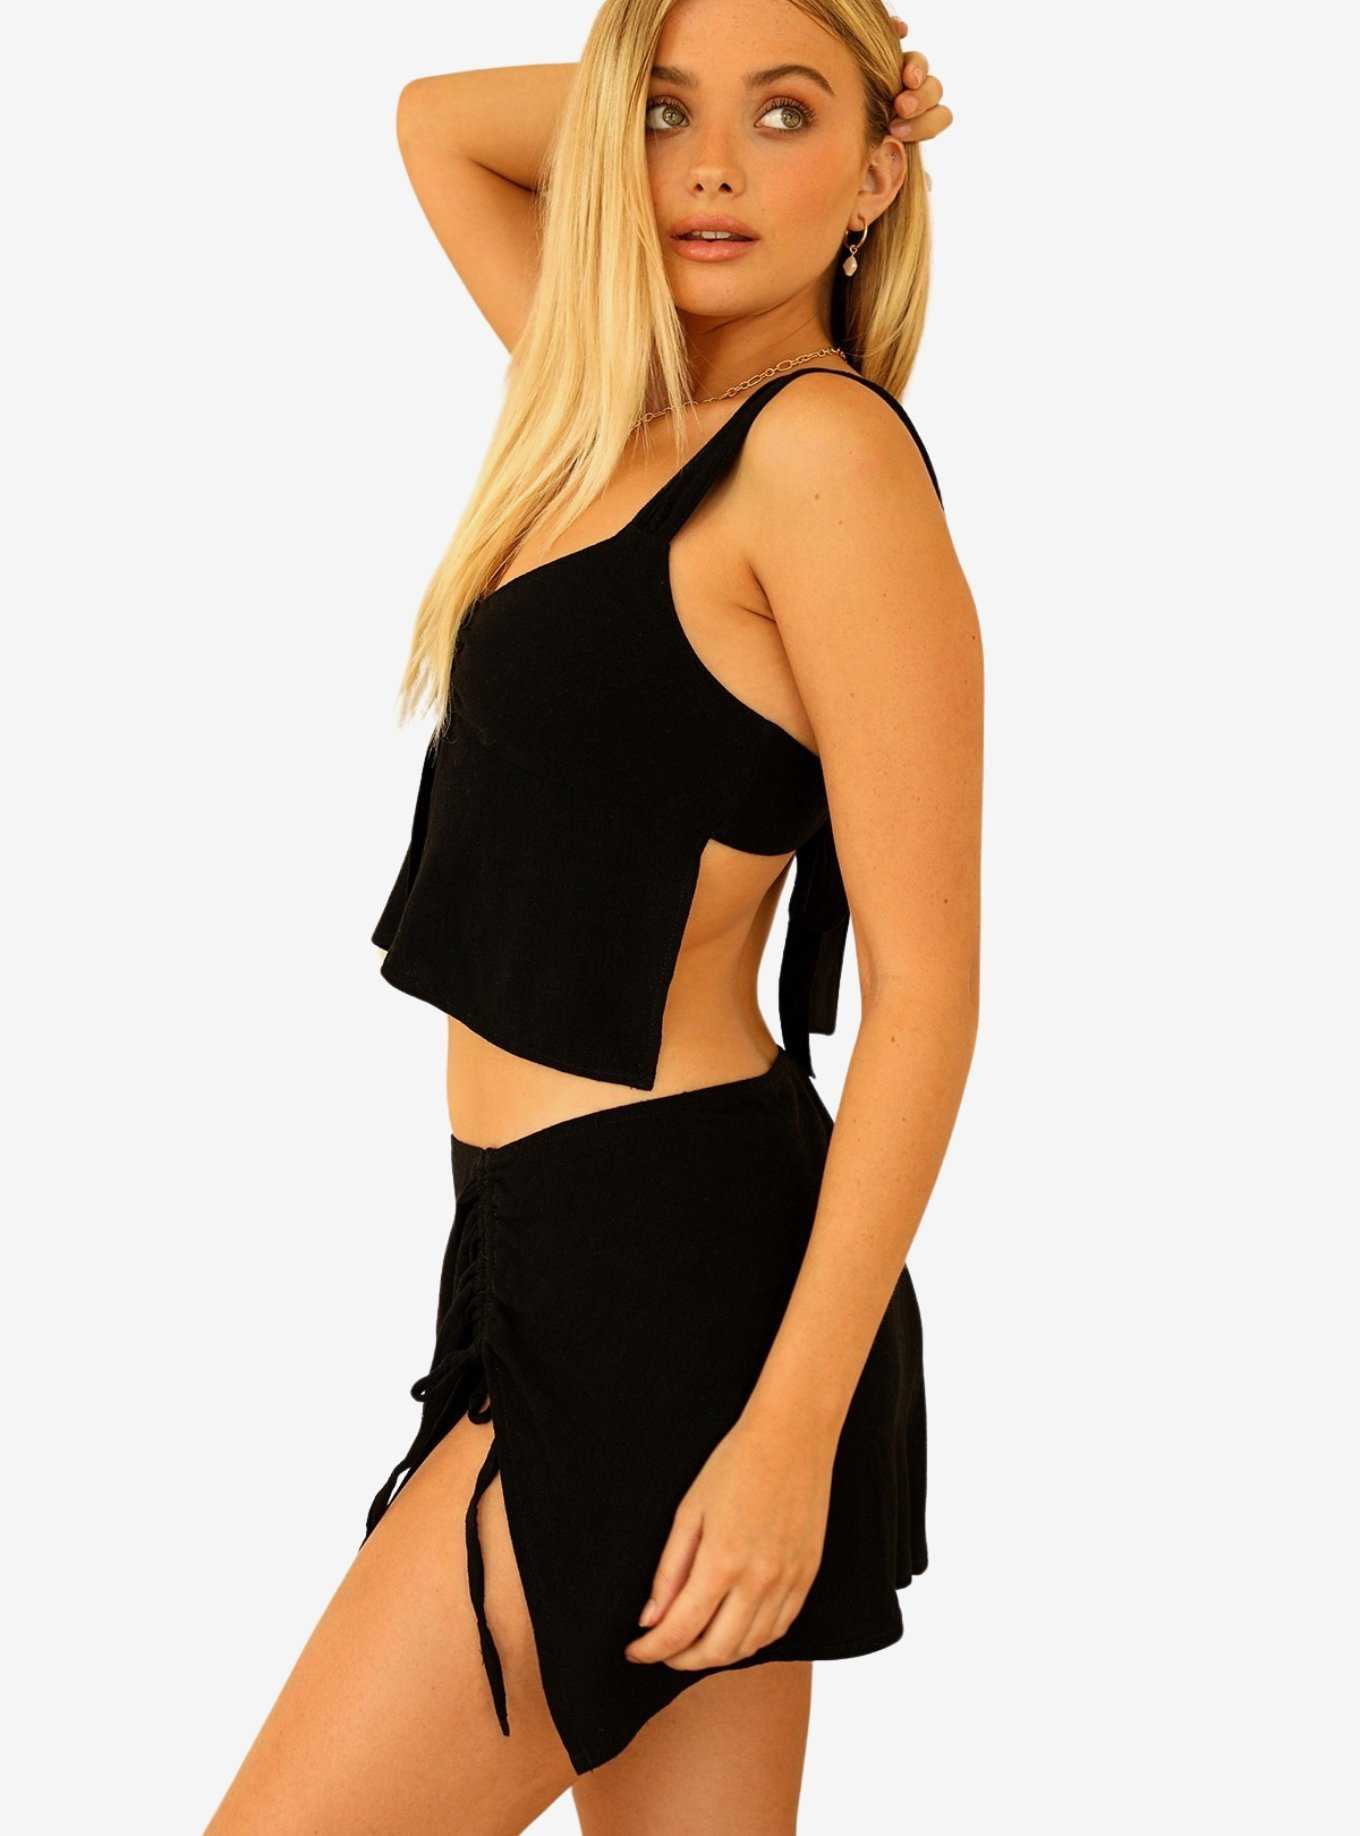 Dippin' Daisy's Paola Swim Cover-Up Top Black, , hi-res